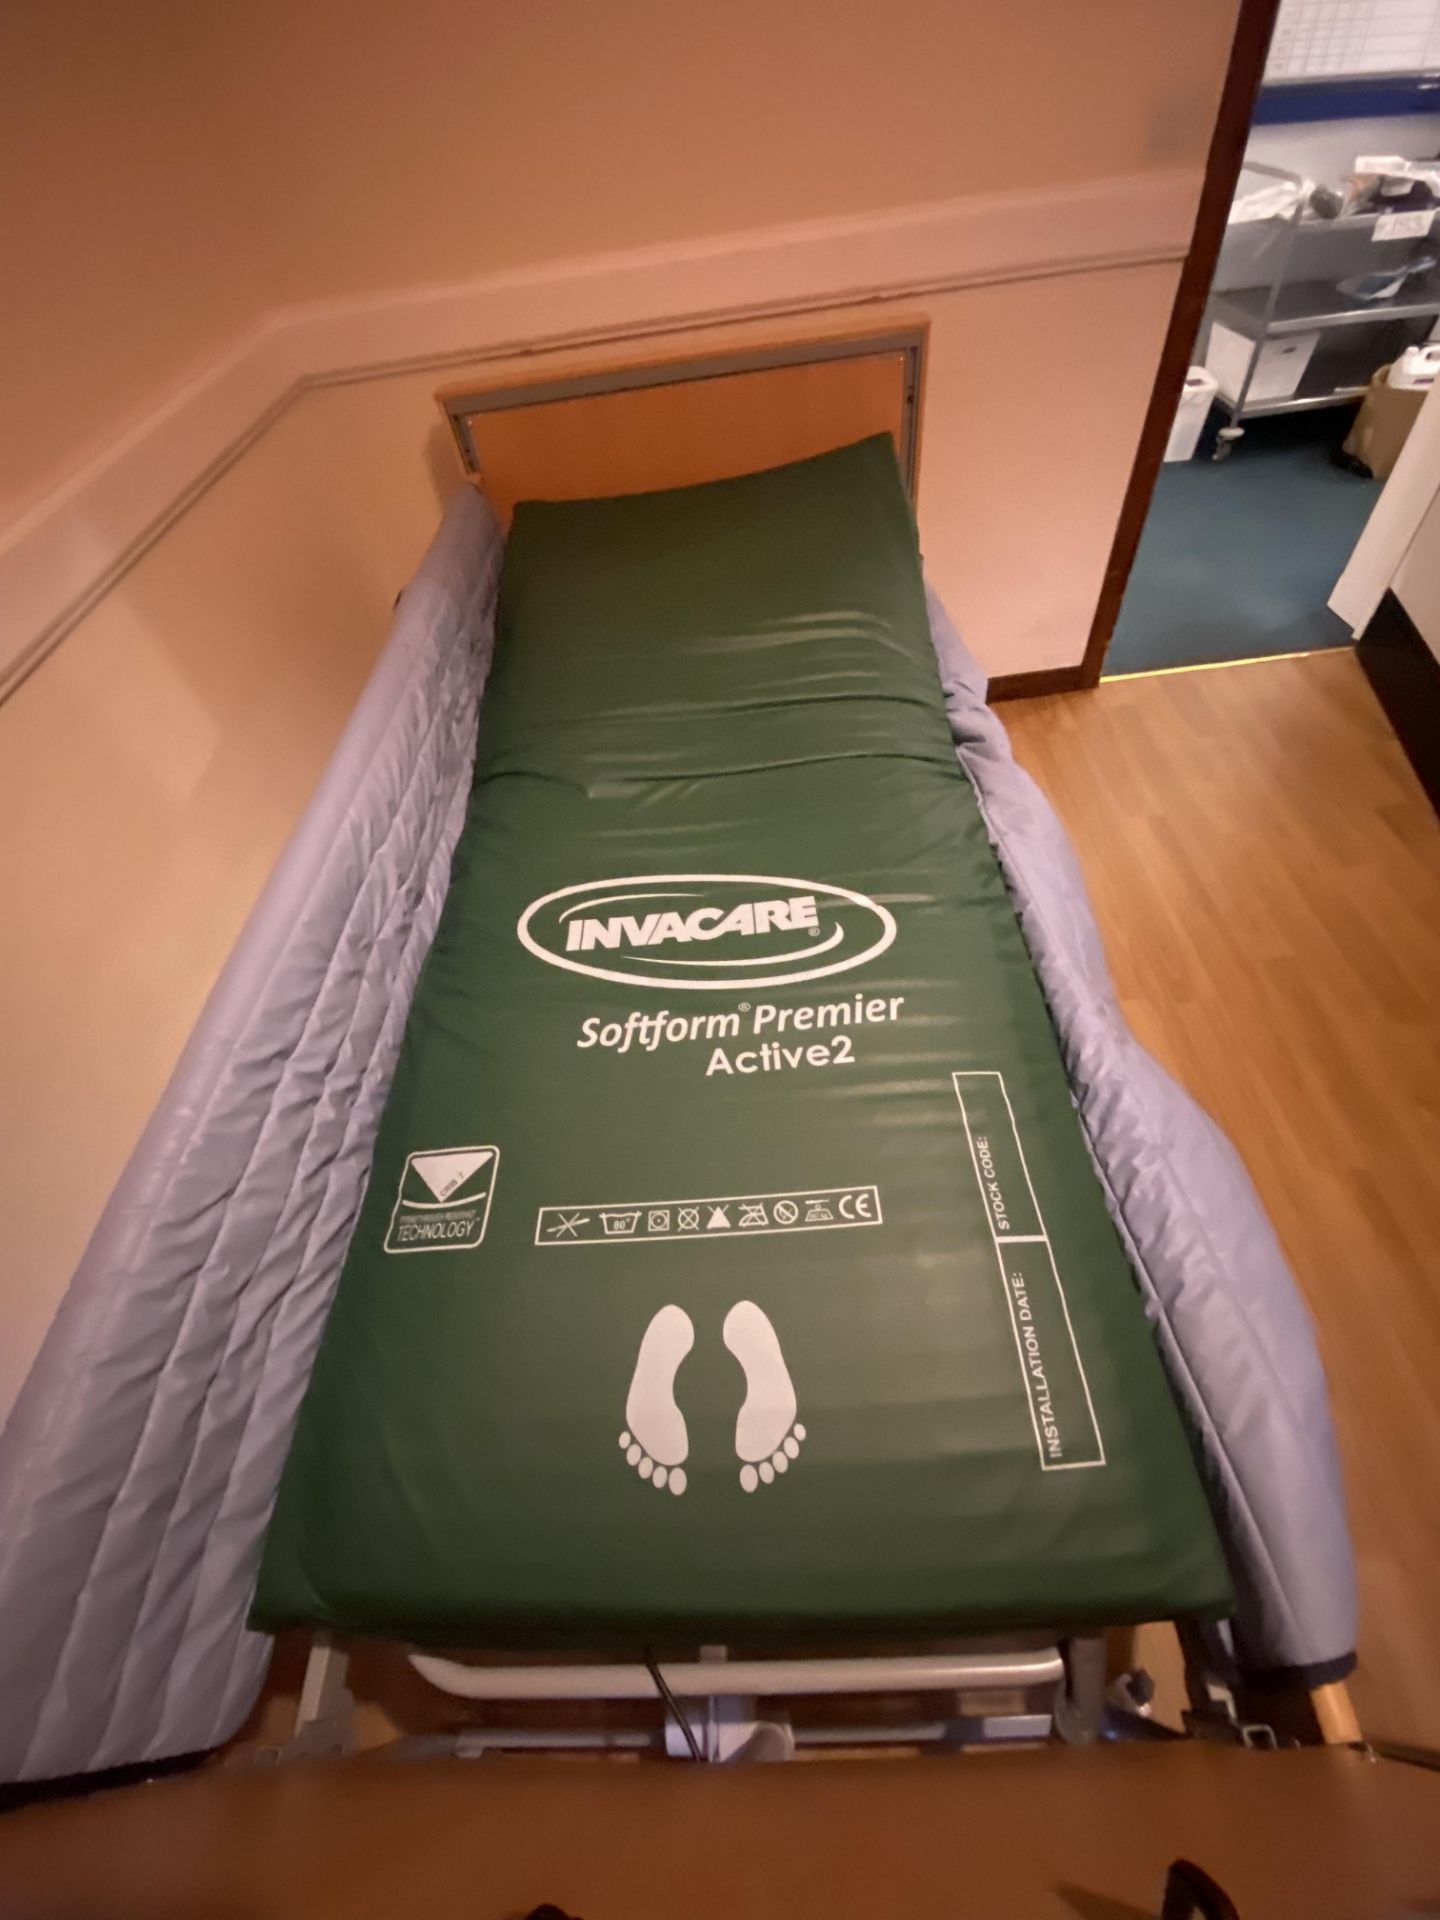 Invacare Mobile Adjustable Height Bed Frame, with Invacare soft foam premier active 2 mattress and - Image 2 of 3